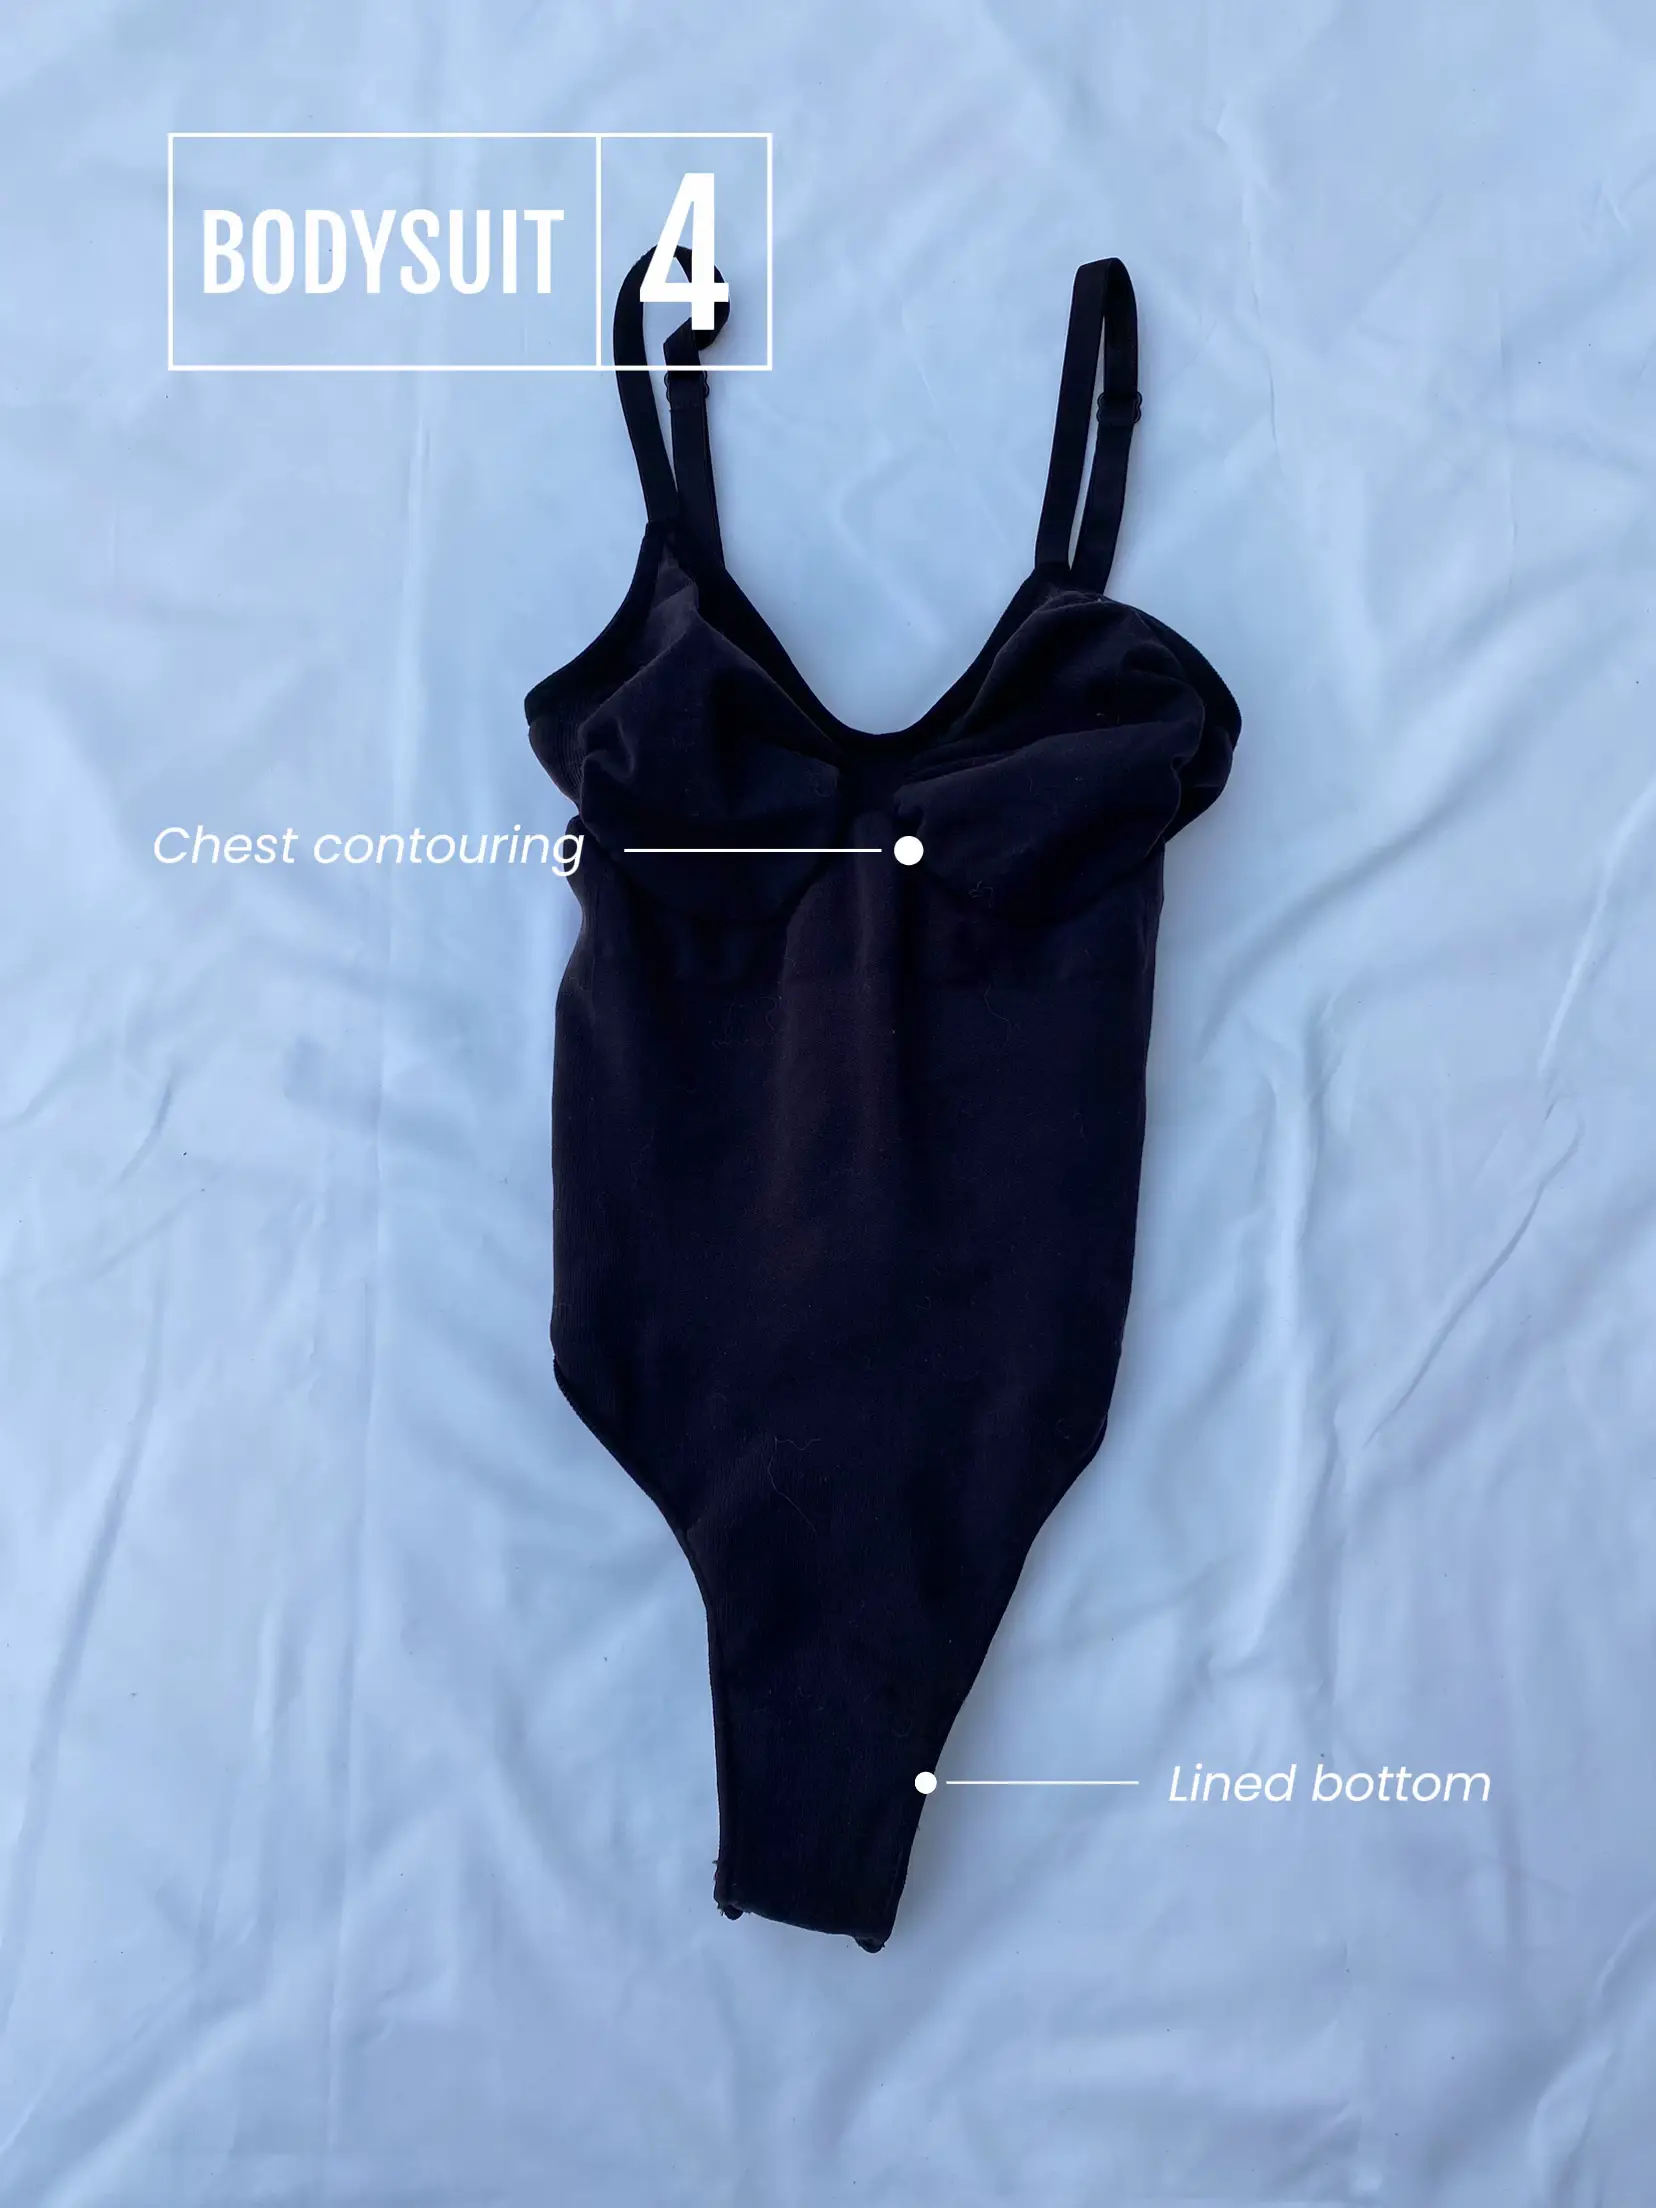 3 Types of Bodysuits: Capsule Wardrobe, Gallery posted by Pattipan